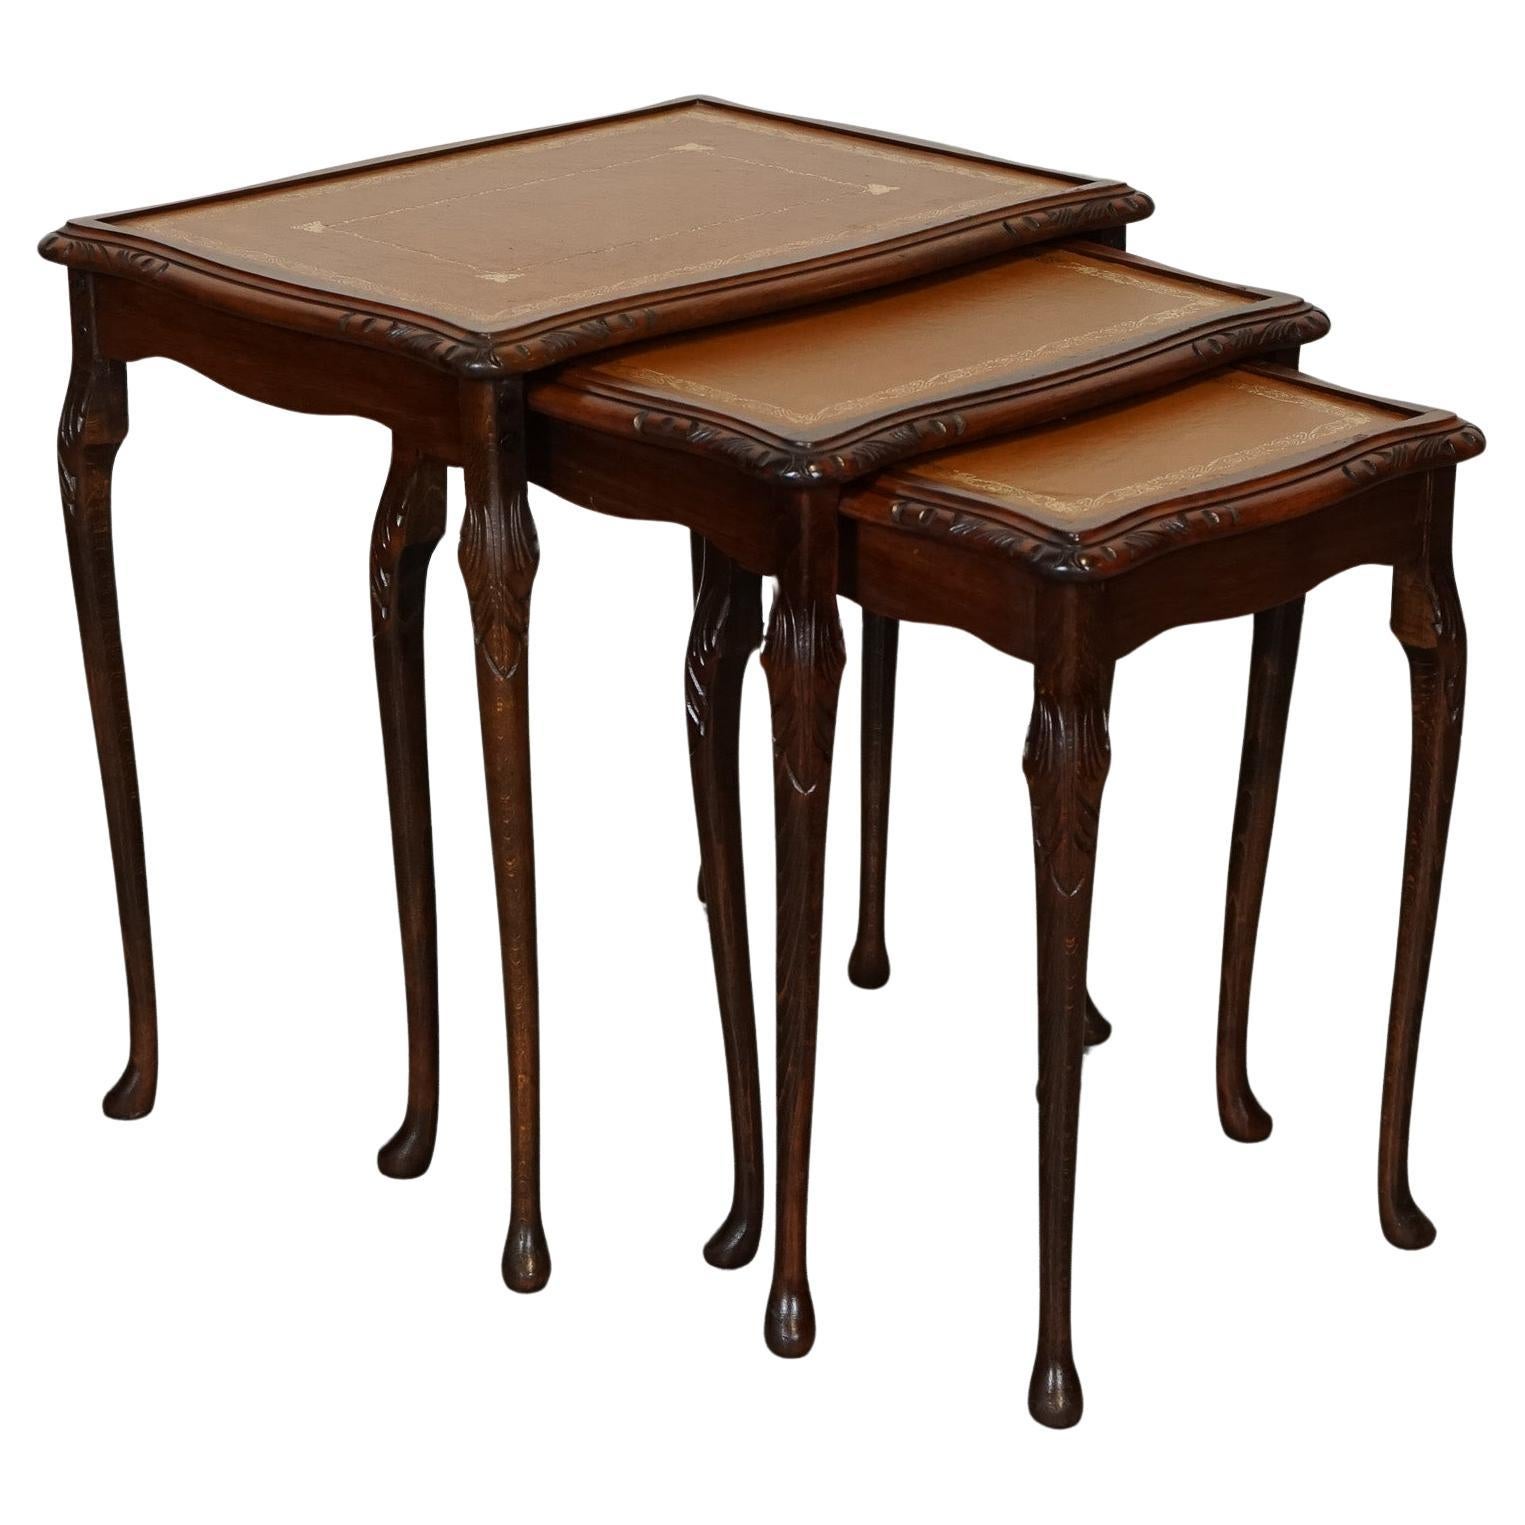 VINTAGE NEST OF TABLES QUEEN ANNE STYLE LEGS WiTH BROWN EMBOSSED LEATHER TOP J1 For Sale